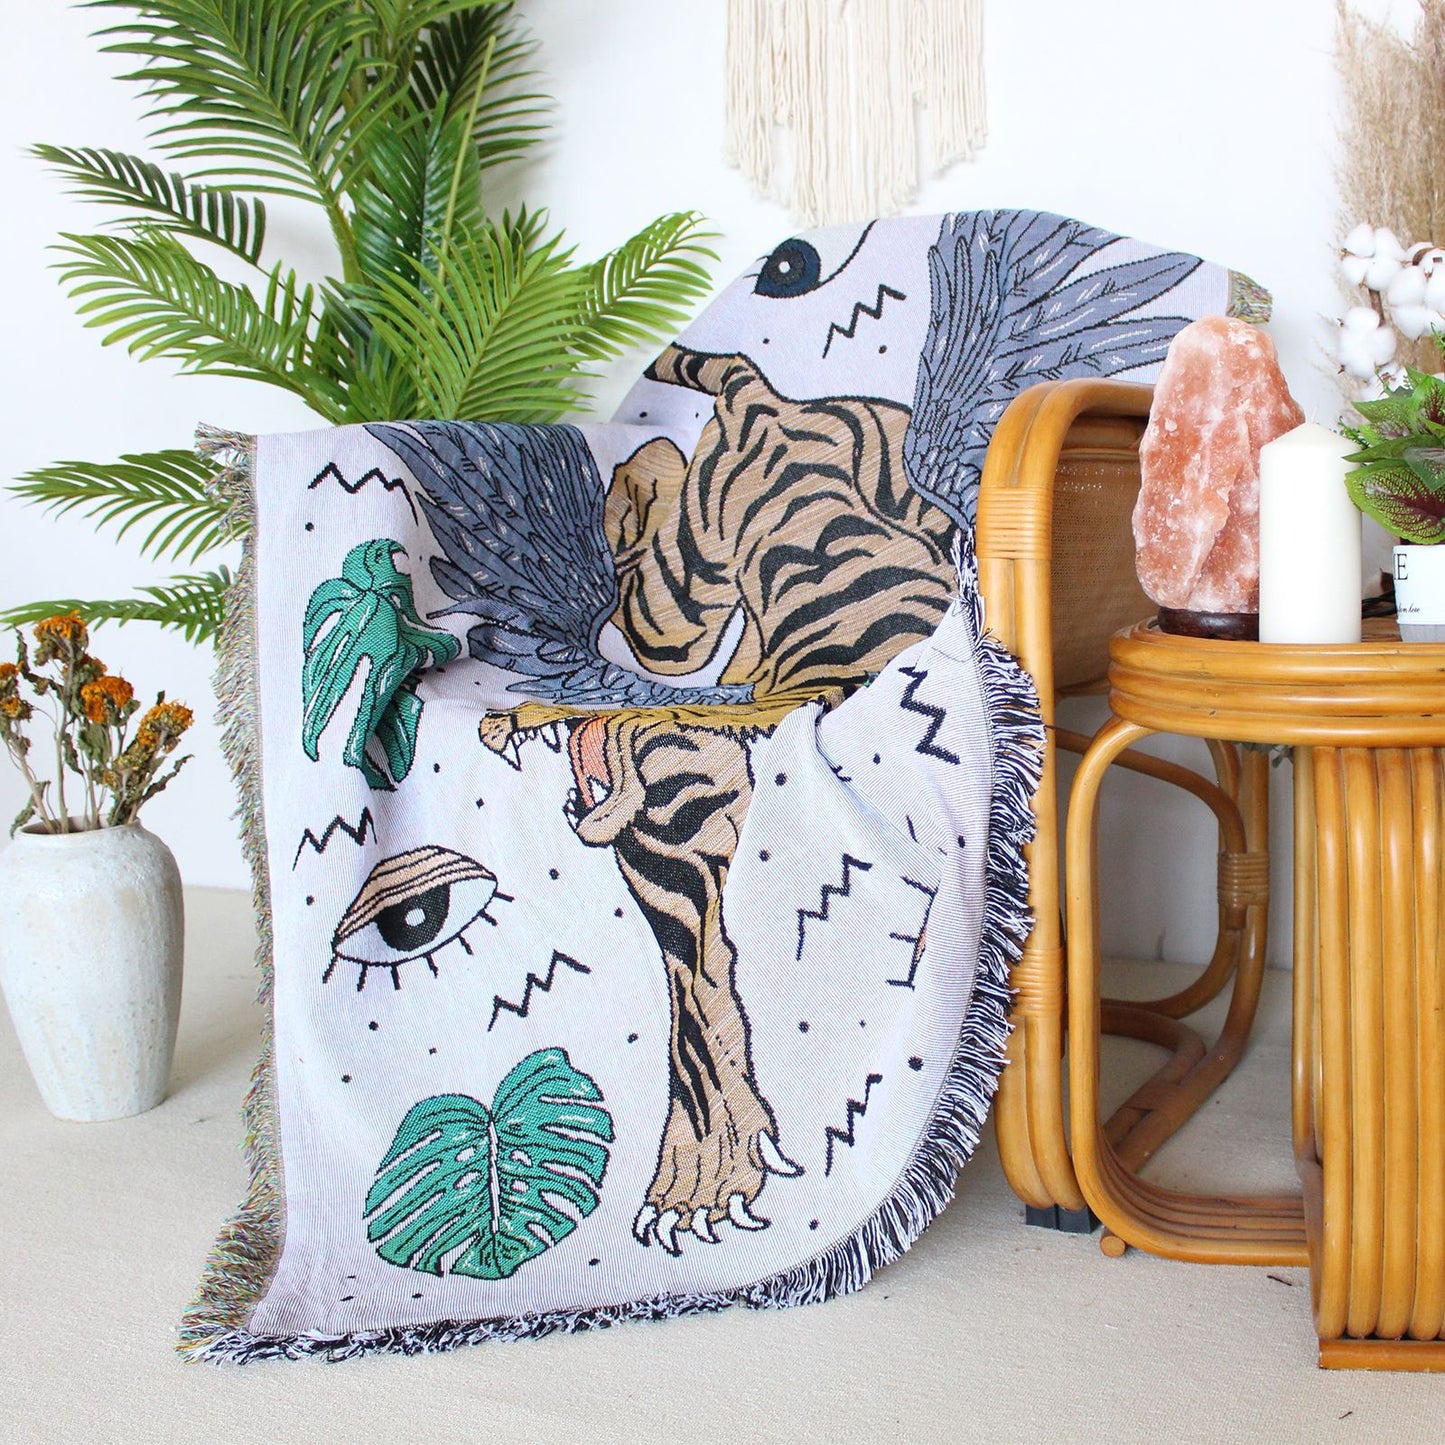 Tiger Tale Woven Throw Blanket Picnic Blanket Sofa Covers 130 x 160 CM